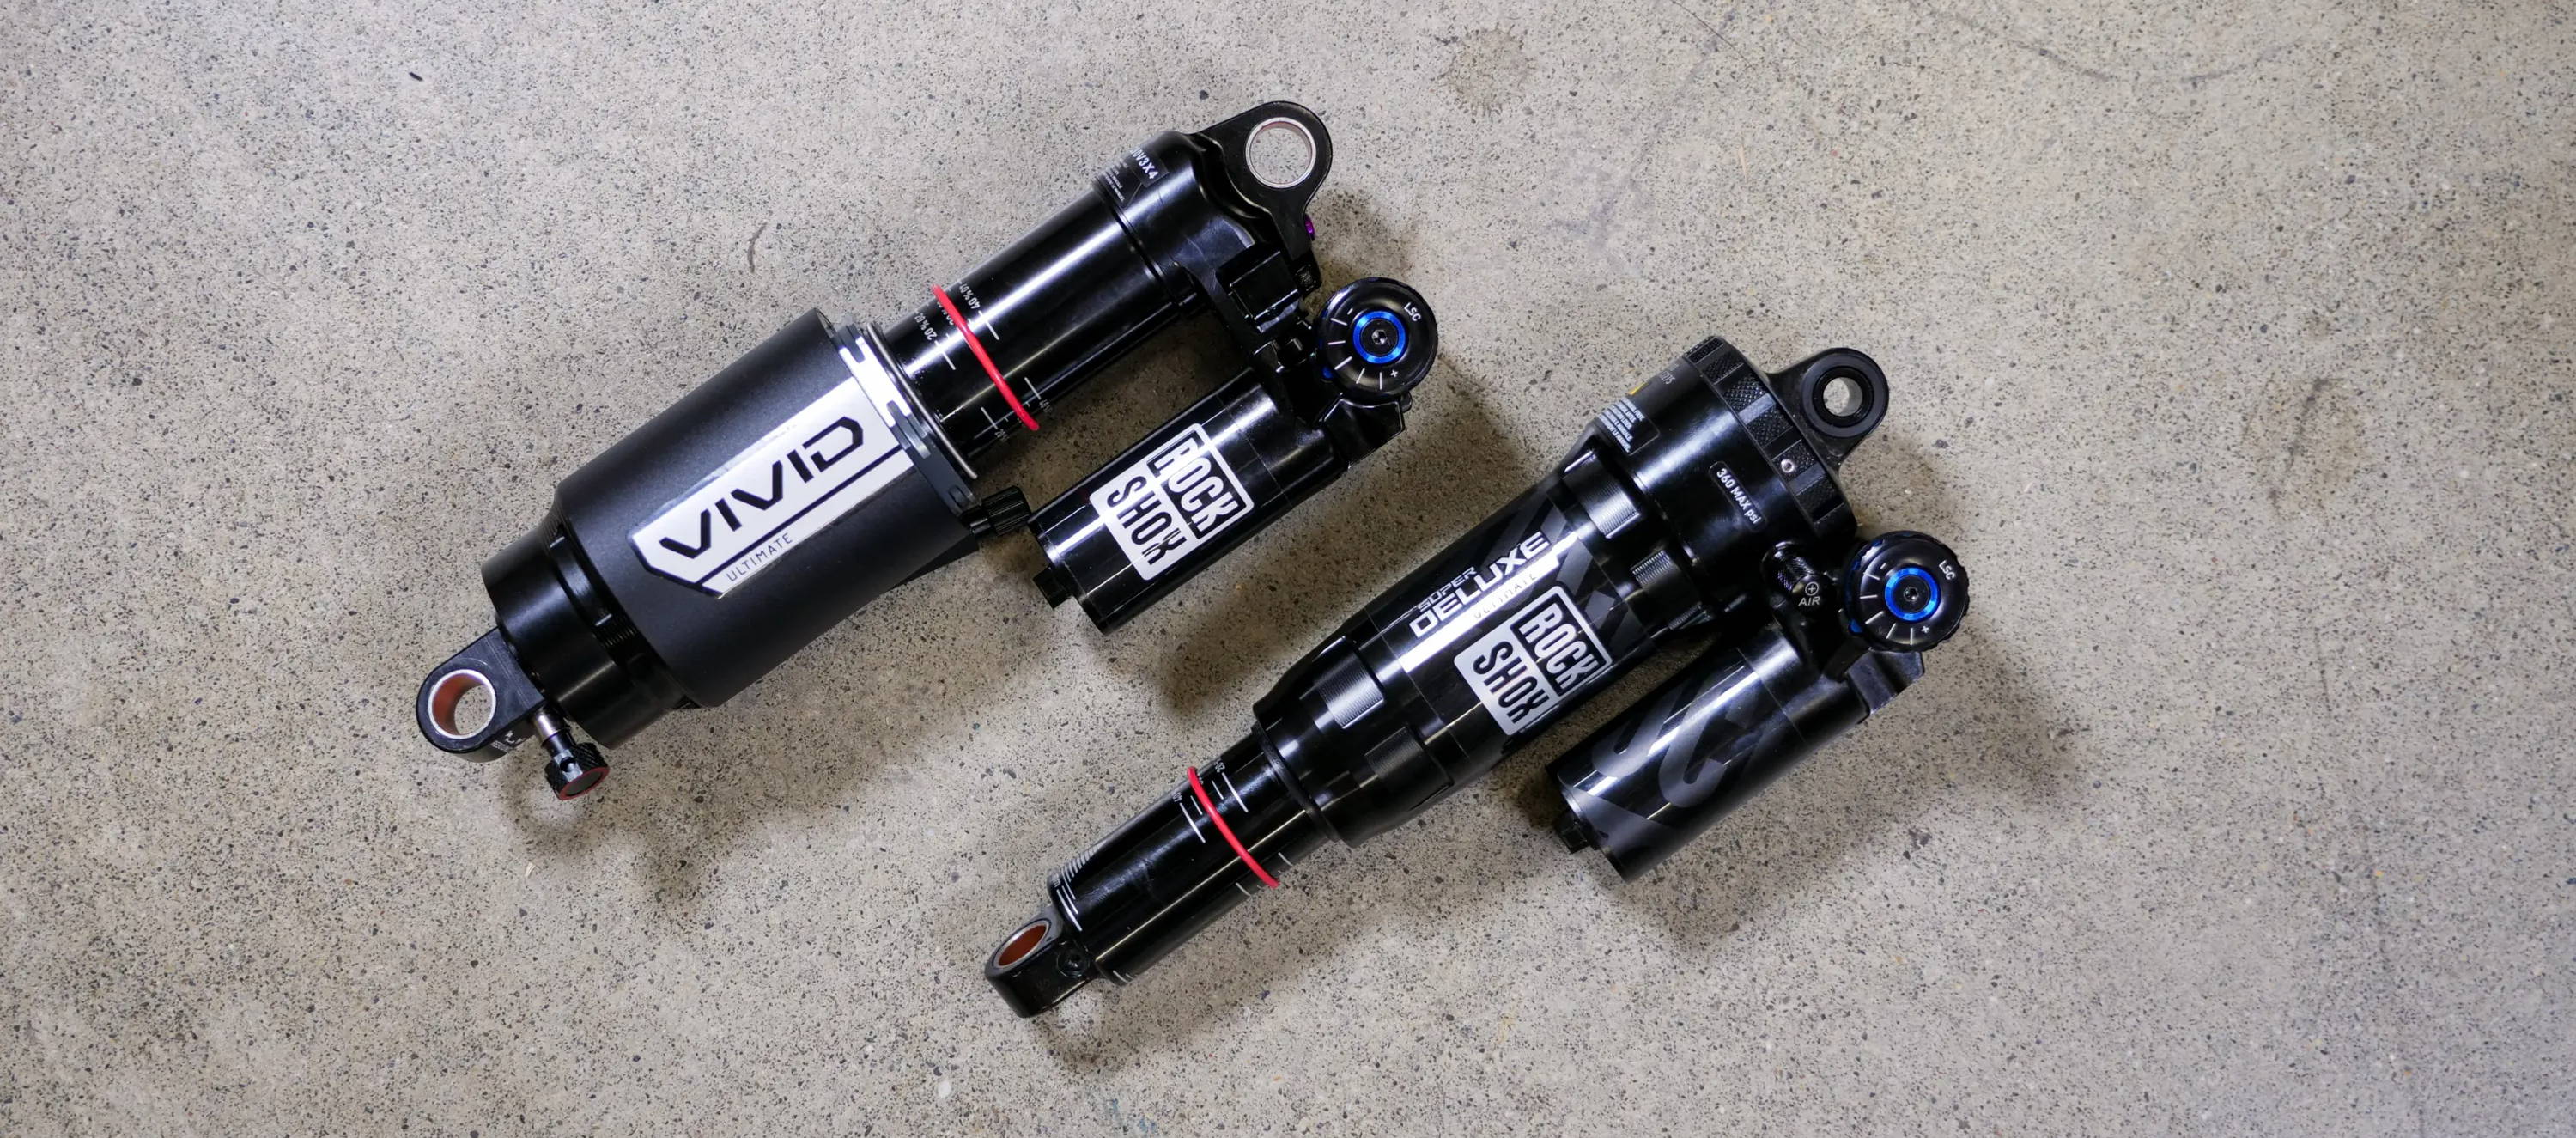 rockshox super deluxe ultimate and vivid rear mountain bike shocks laying on concrete to be compared